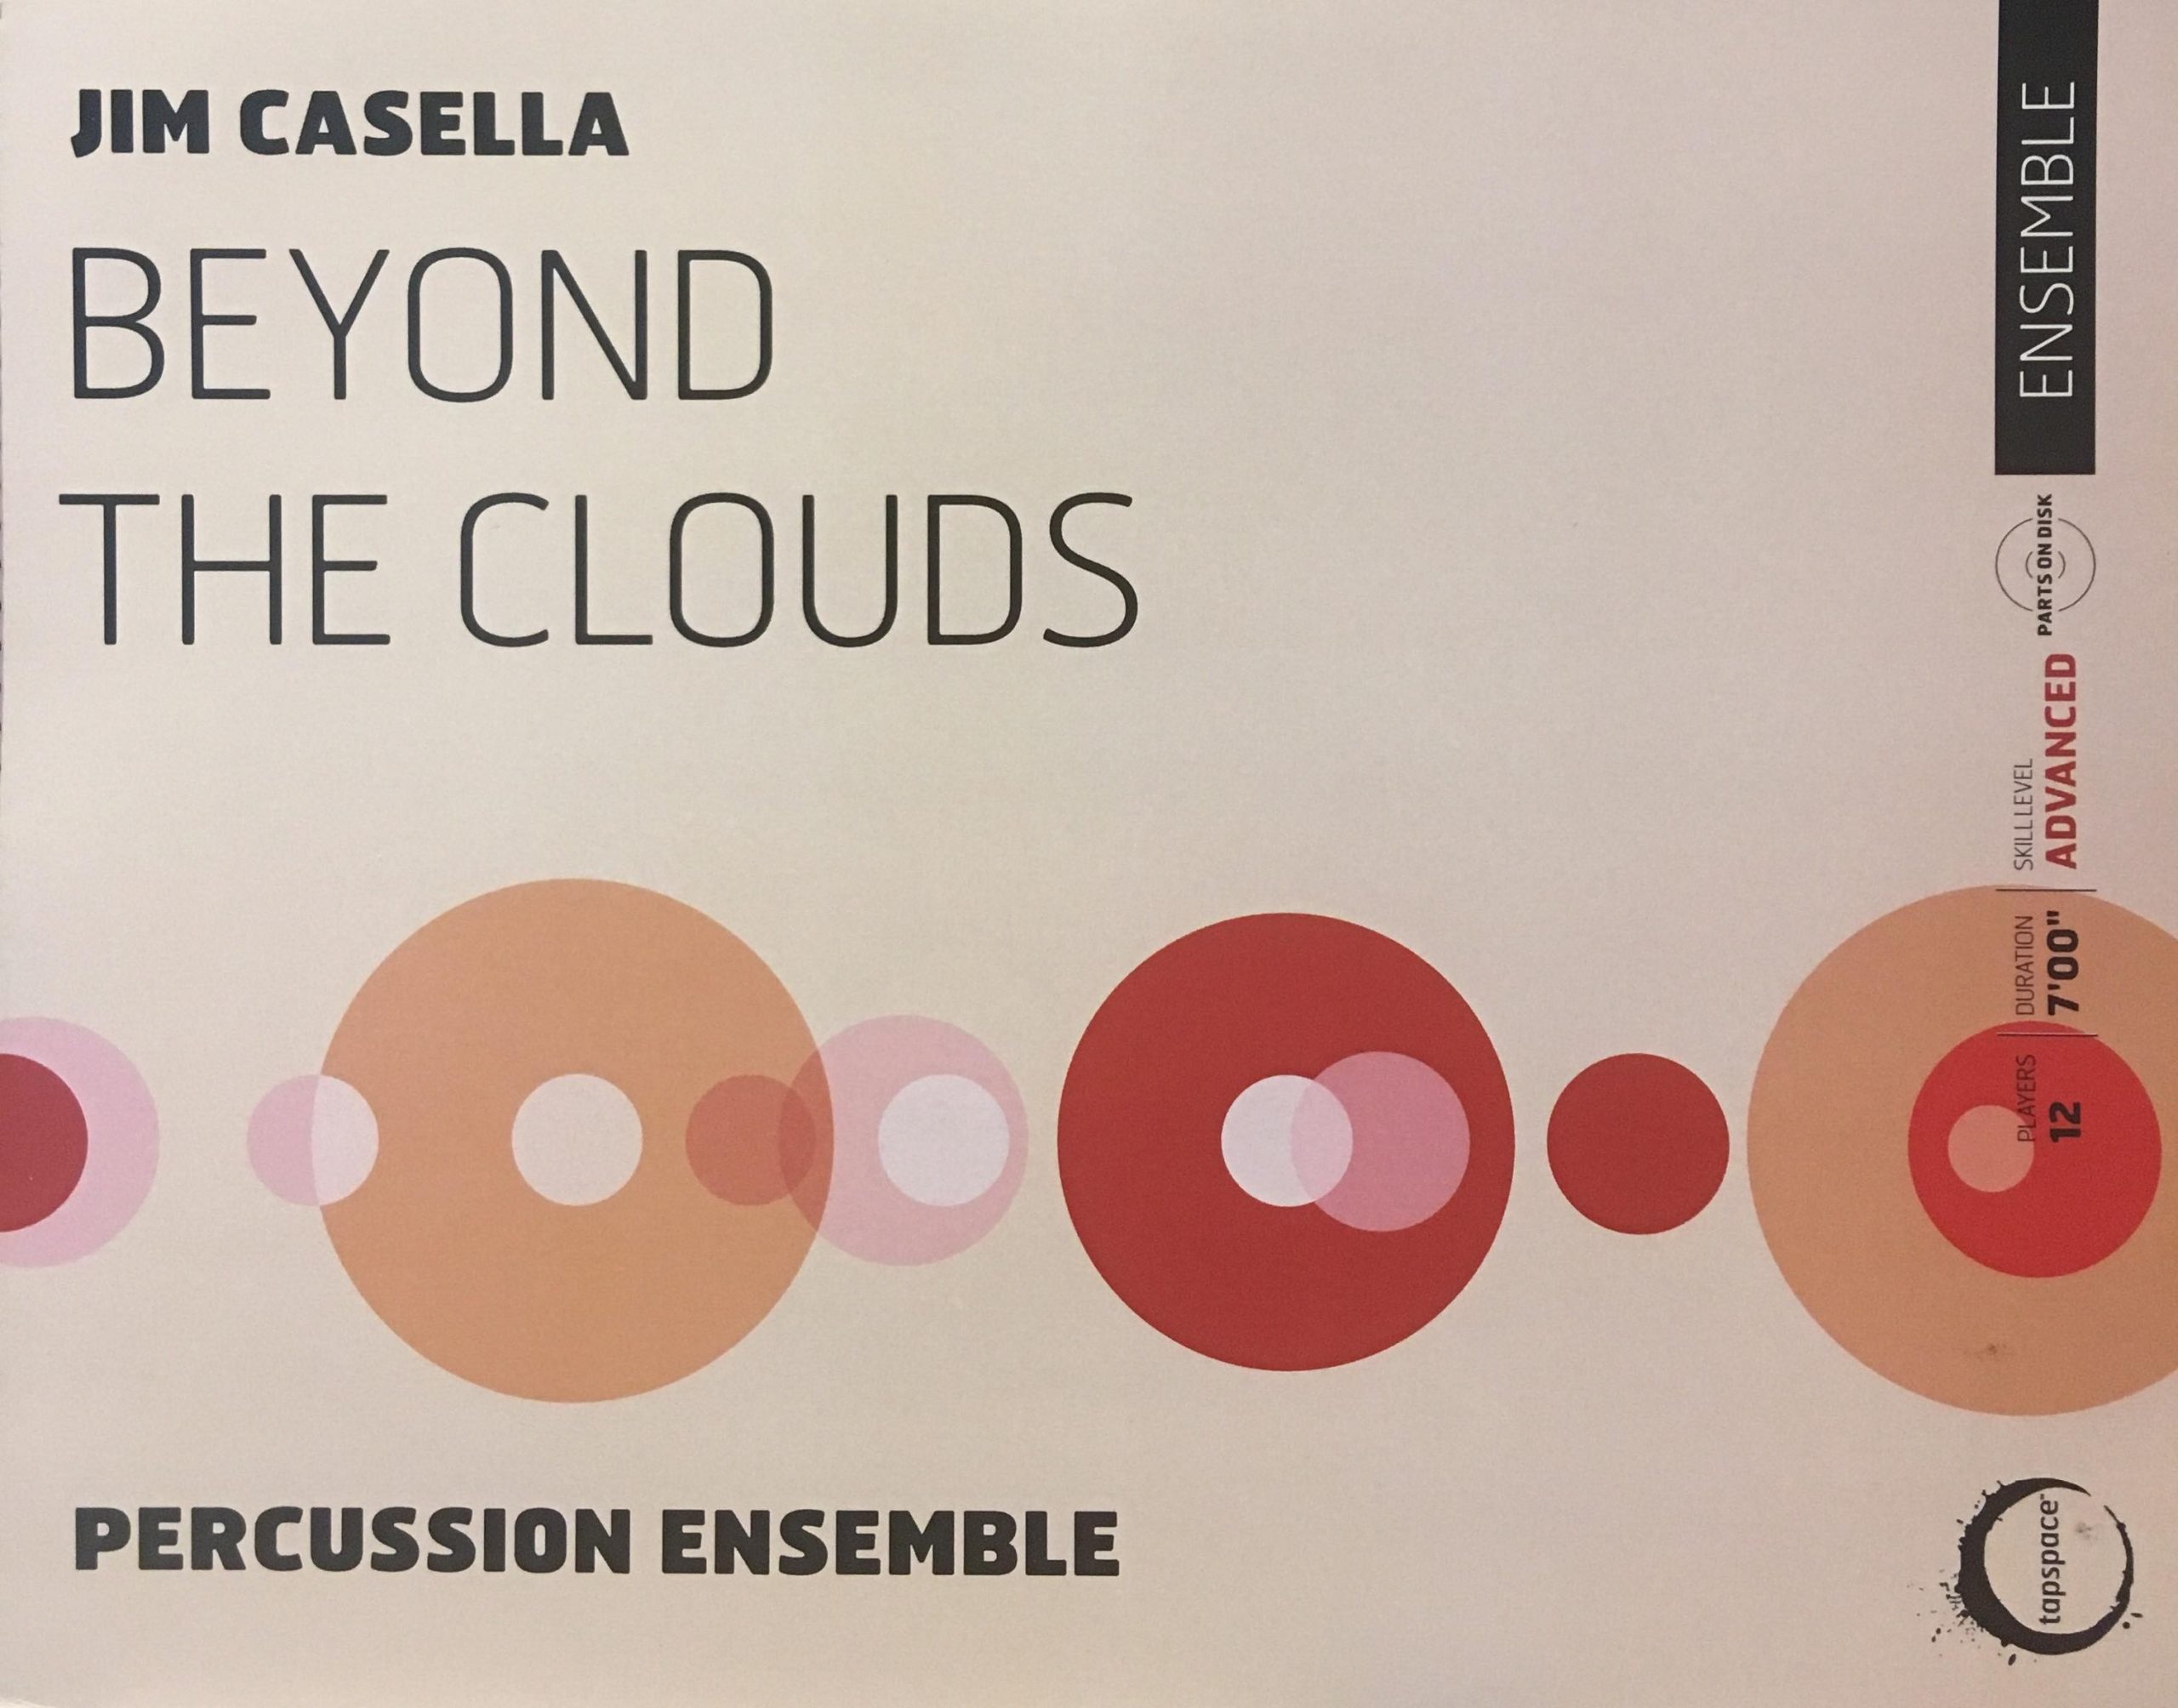 Beyond the Clouds by Jim Casella